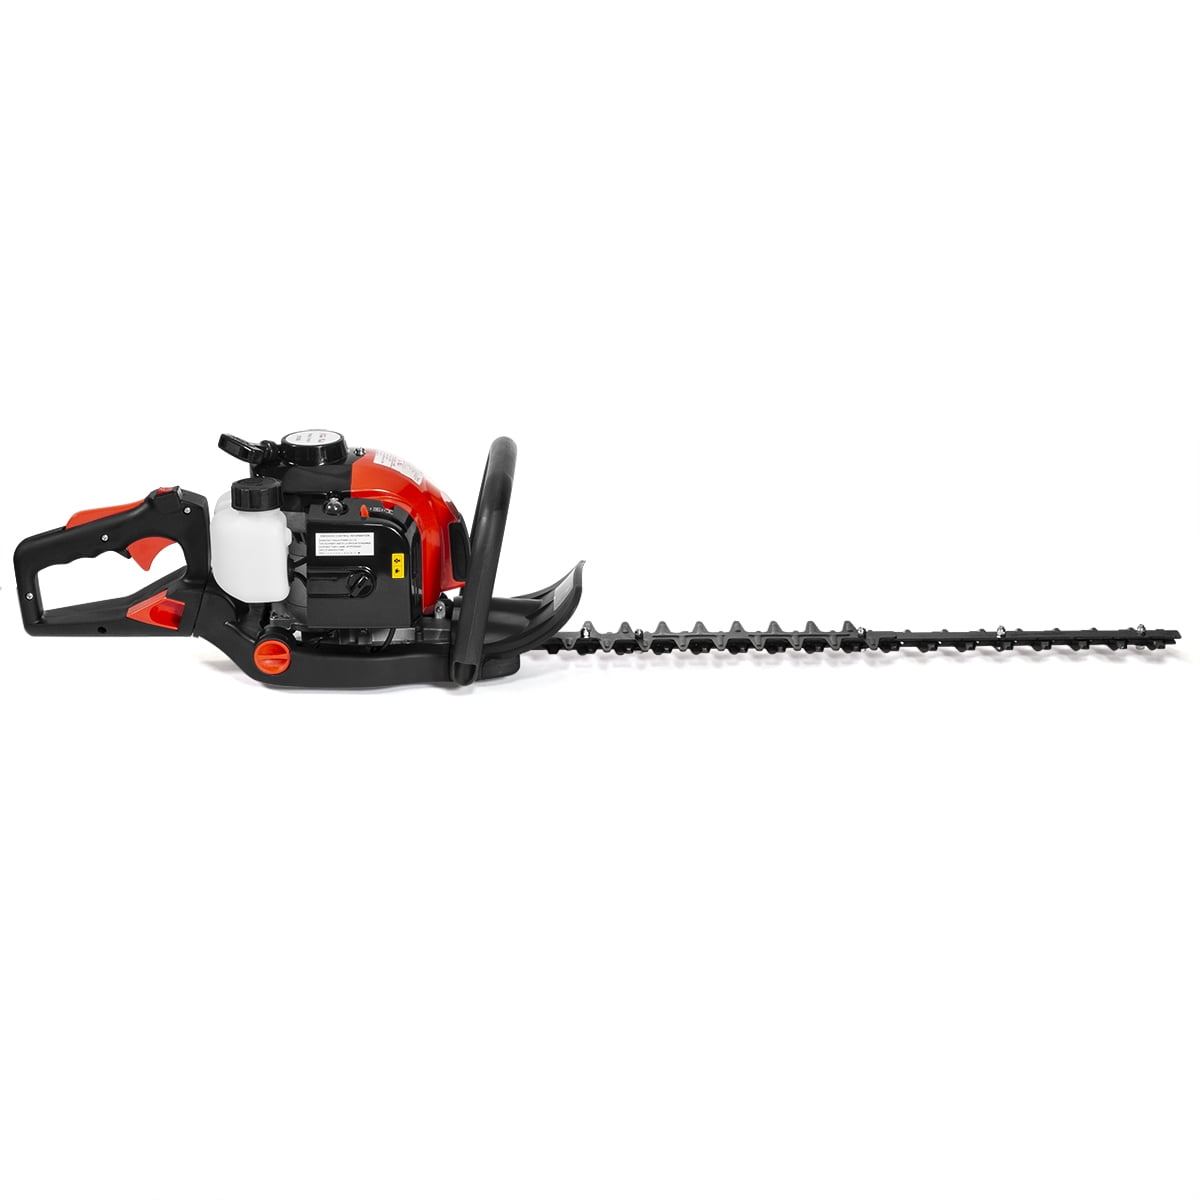 EASYG 26cc Gas Hedge Trimmer 24 2-Cycle Recoil Gasoline Trim Blade Blade Double-Sided with Safety Gloves and Some Accessories 